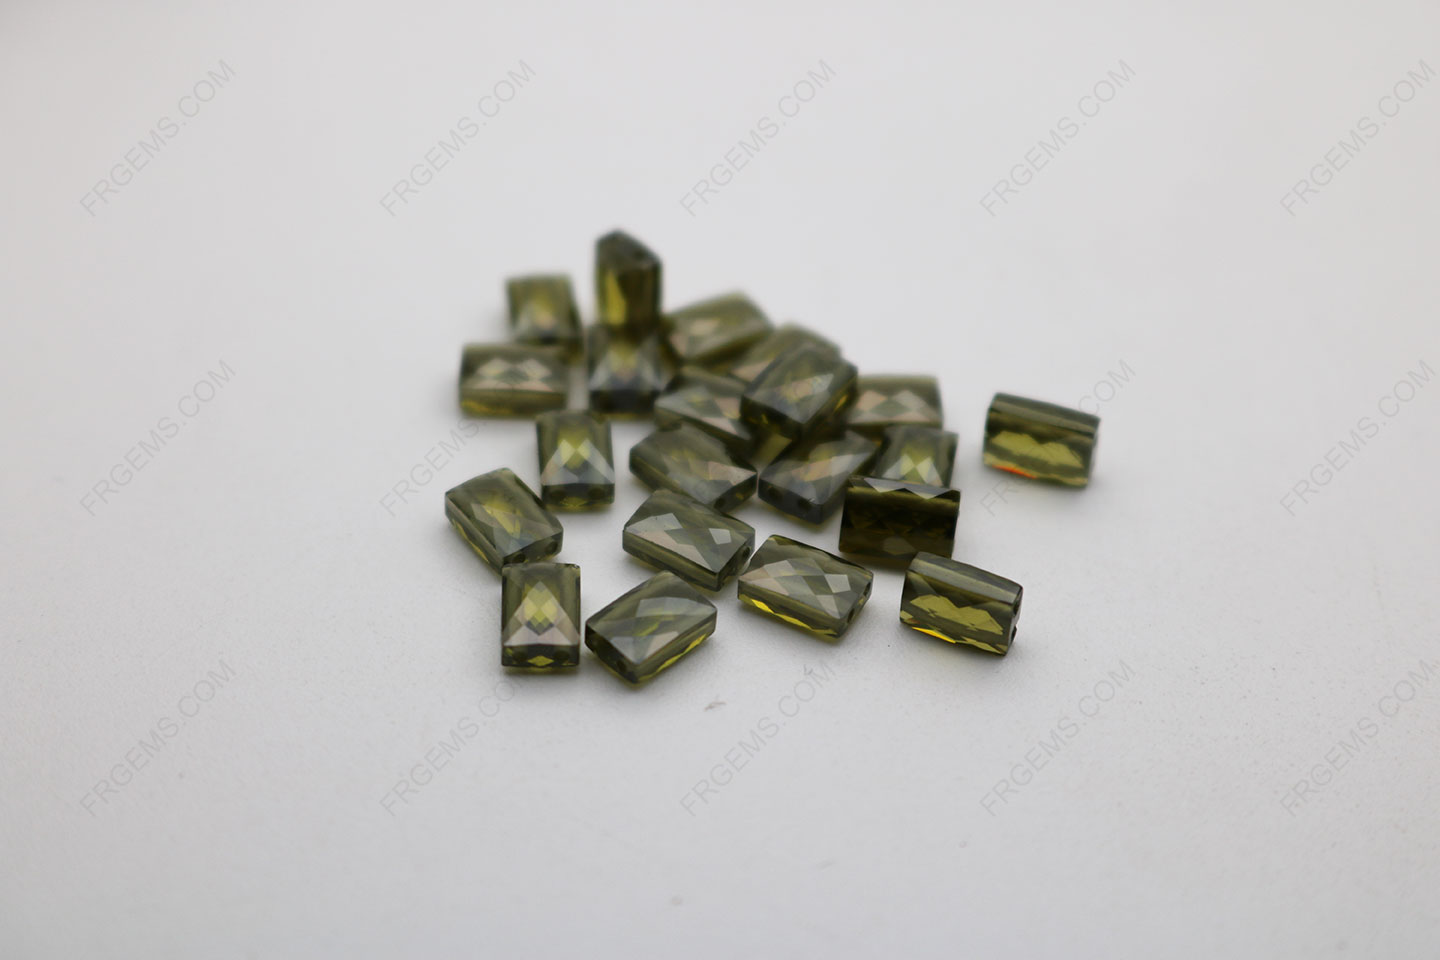 Cubic Zirconia Peridot Rectangle Shape Double Checkerboard faceted cut 9x6mm stones CZ27 IMG_2774